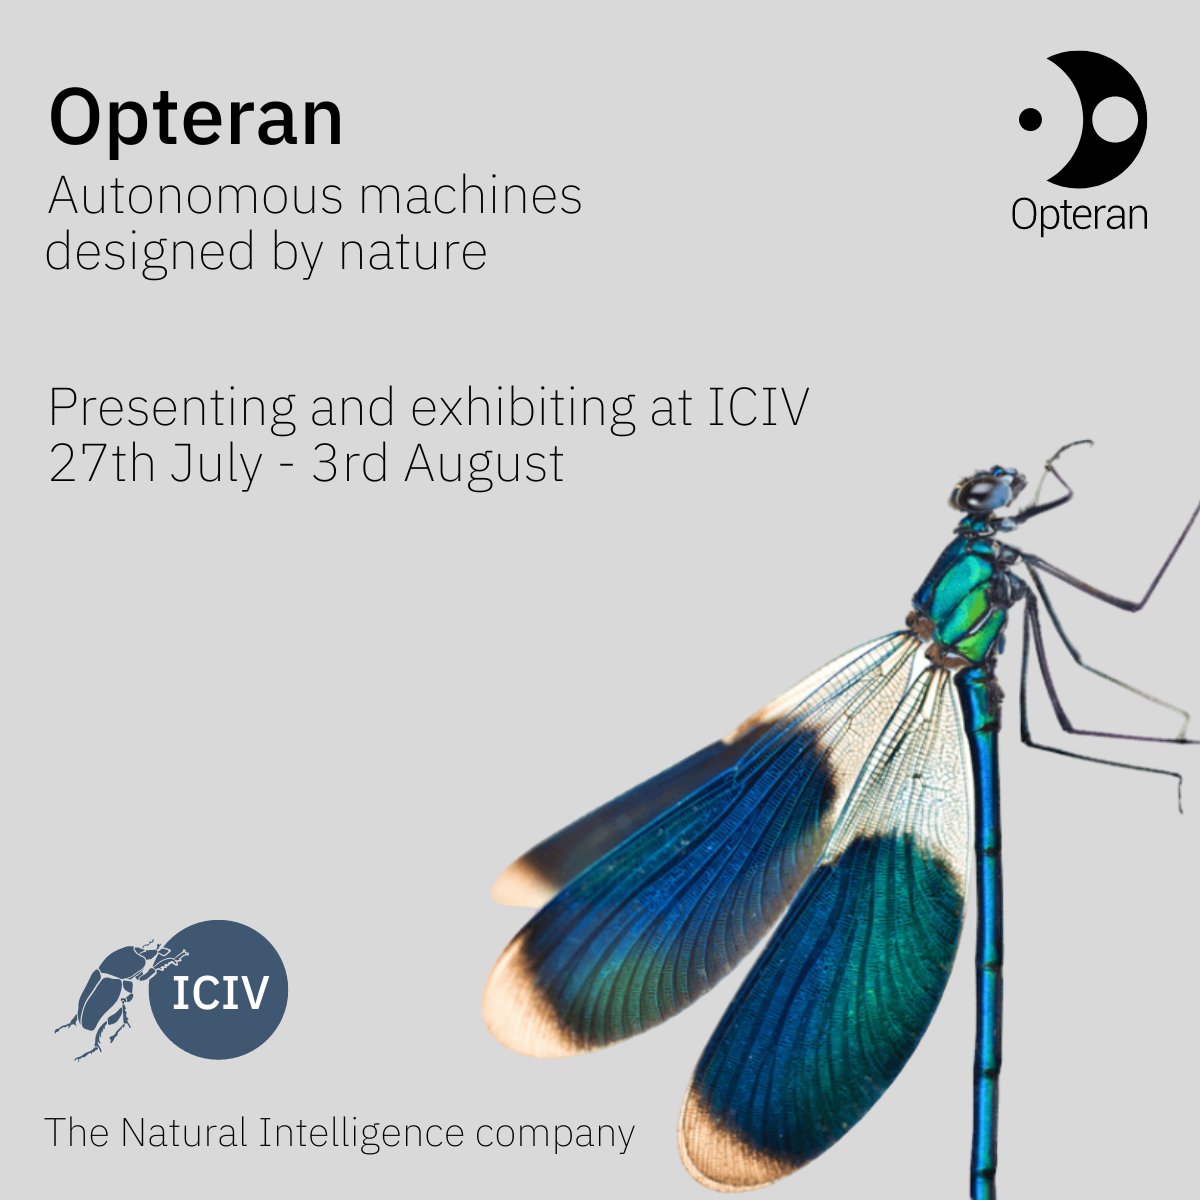 HaDi MaBouDi from @Opteran is attending ICIV to present his research on ‘How bees solve a pattern discrimination task using active vision’. Check it out if you are attending! #research #naturalintelligence #robotics #autonomoussystems #ICIV2023